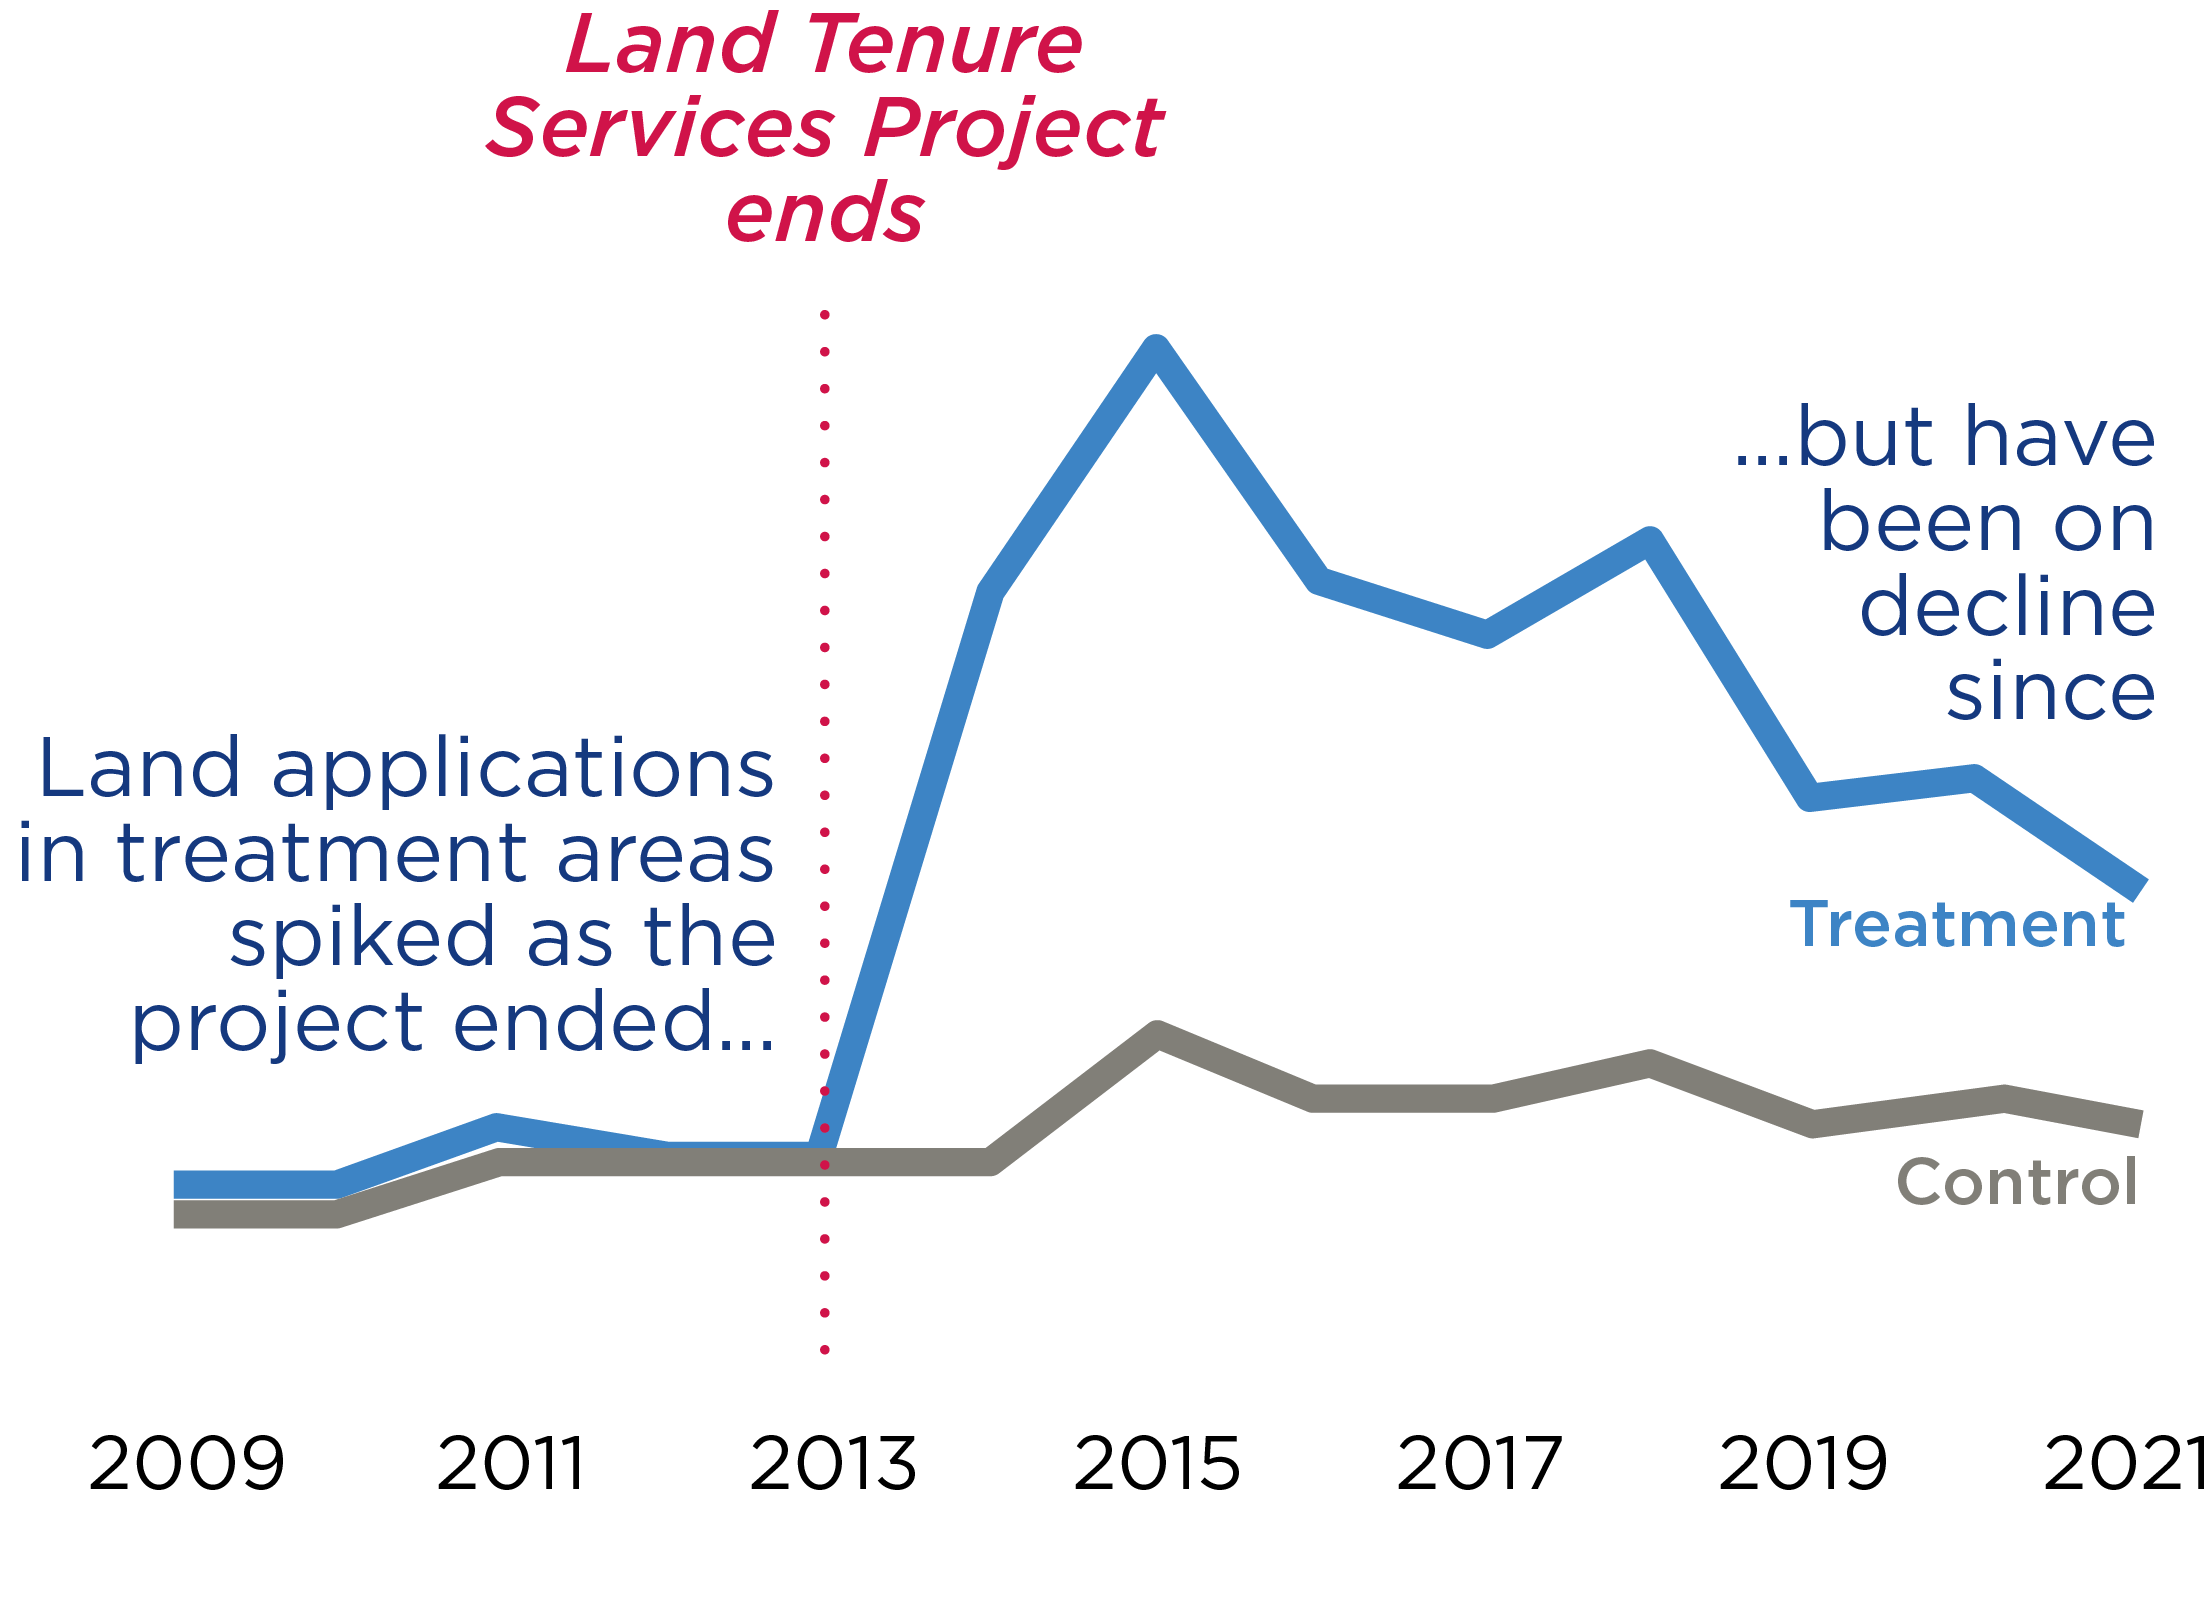 From 2009 to 2021, land applications in control areas were relatively flat. In 2013, land applications in treatment areas spiked, the same time the Land Tenure Services Project ended. Since then, there has been a decline from that peak, from 2013 to 2021.